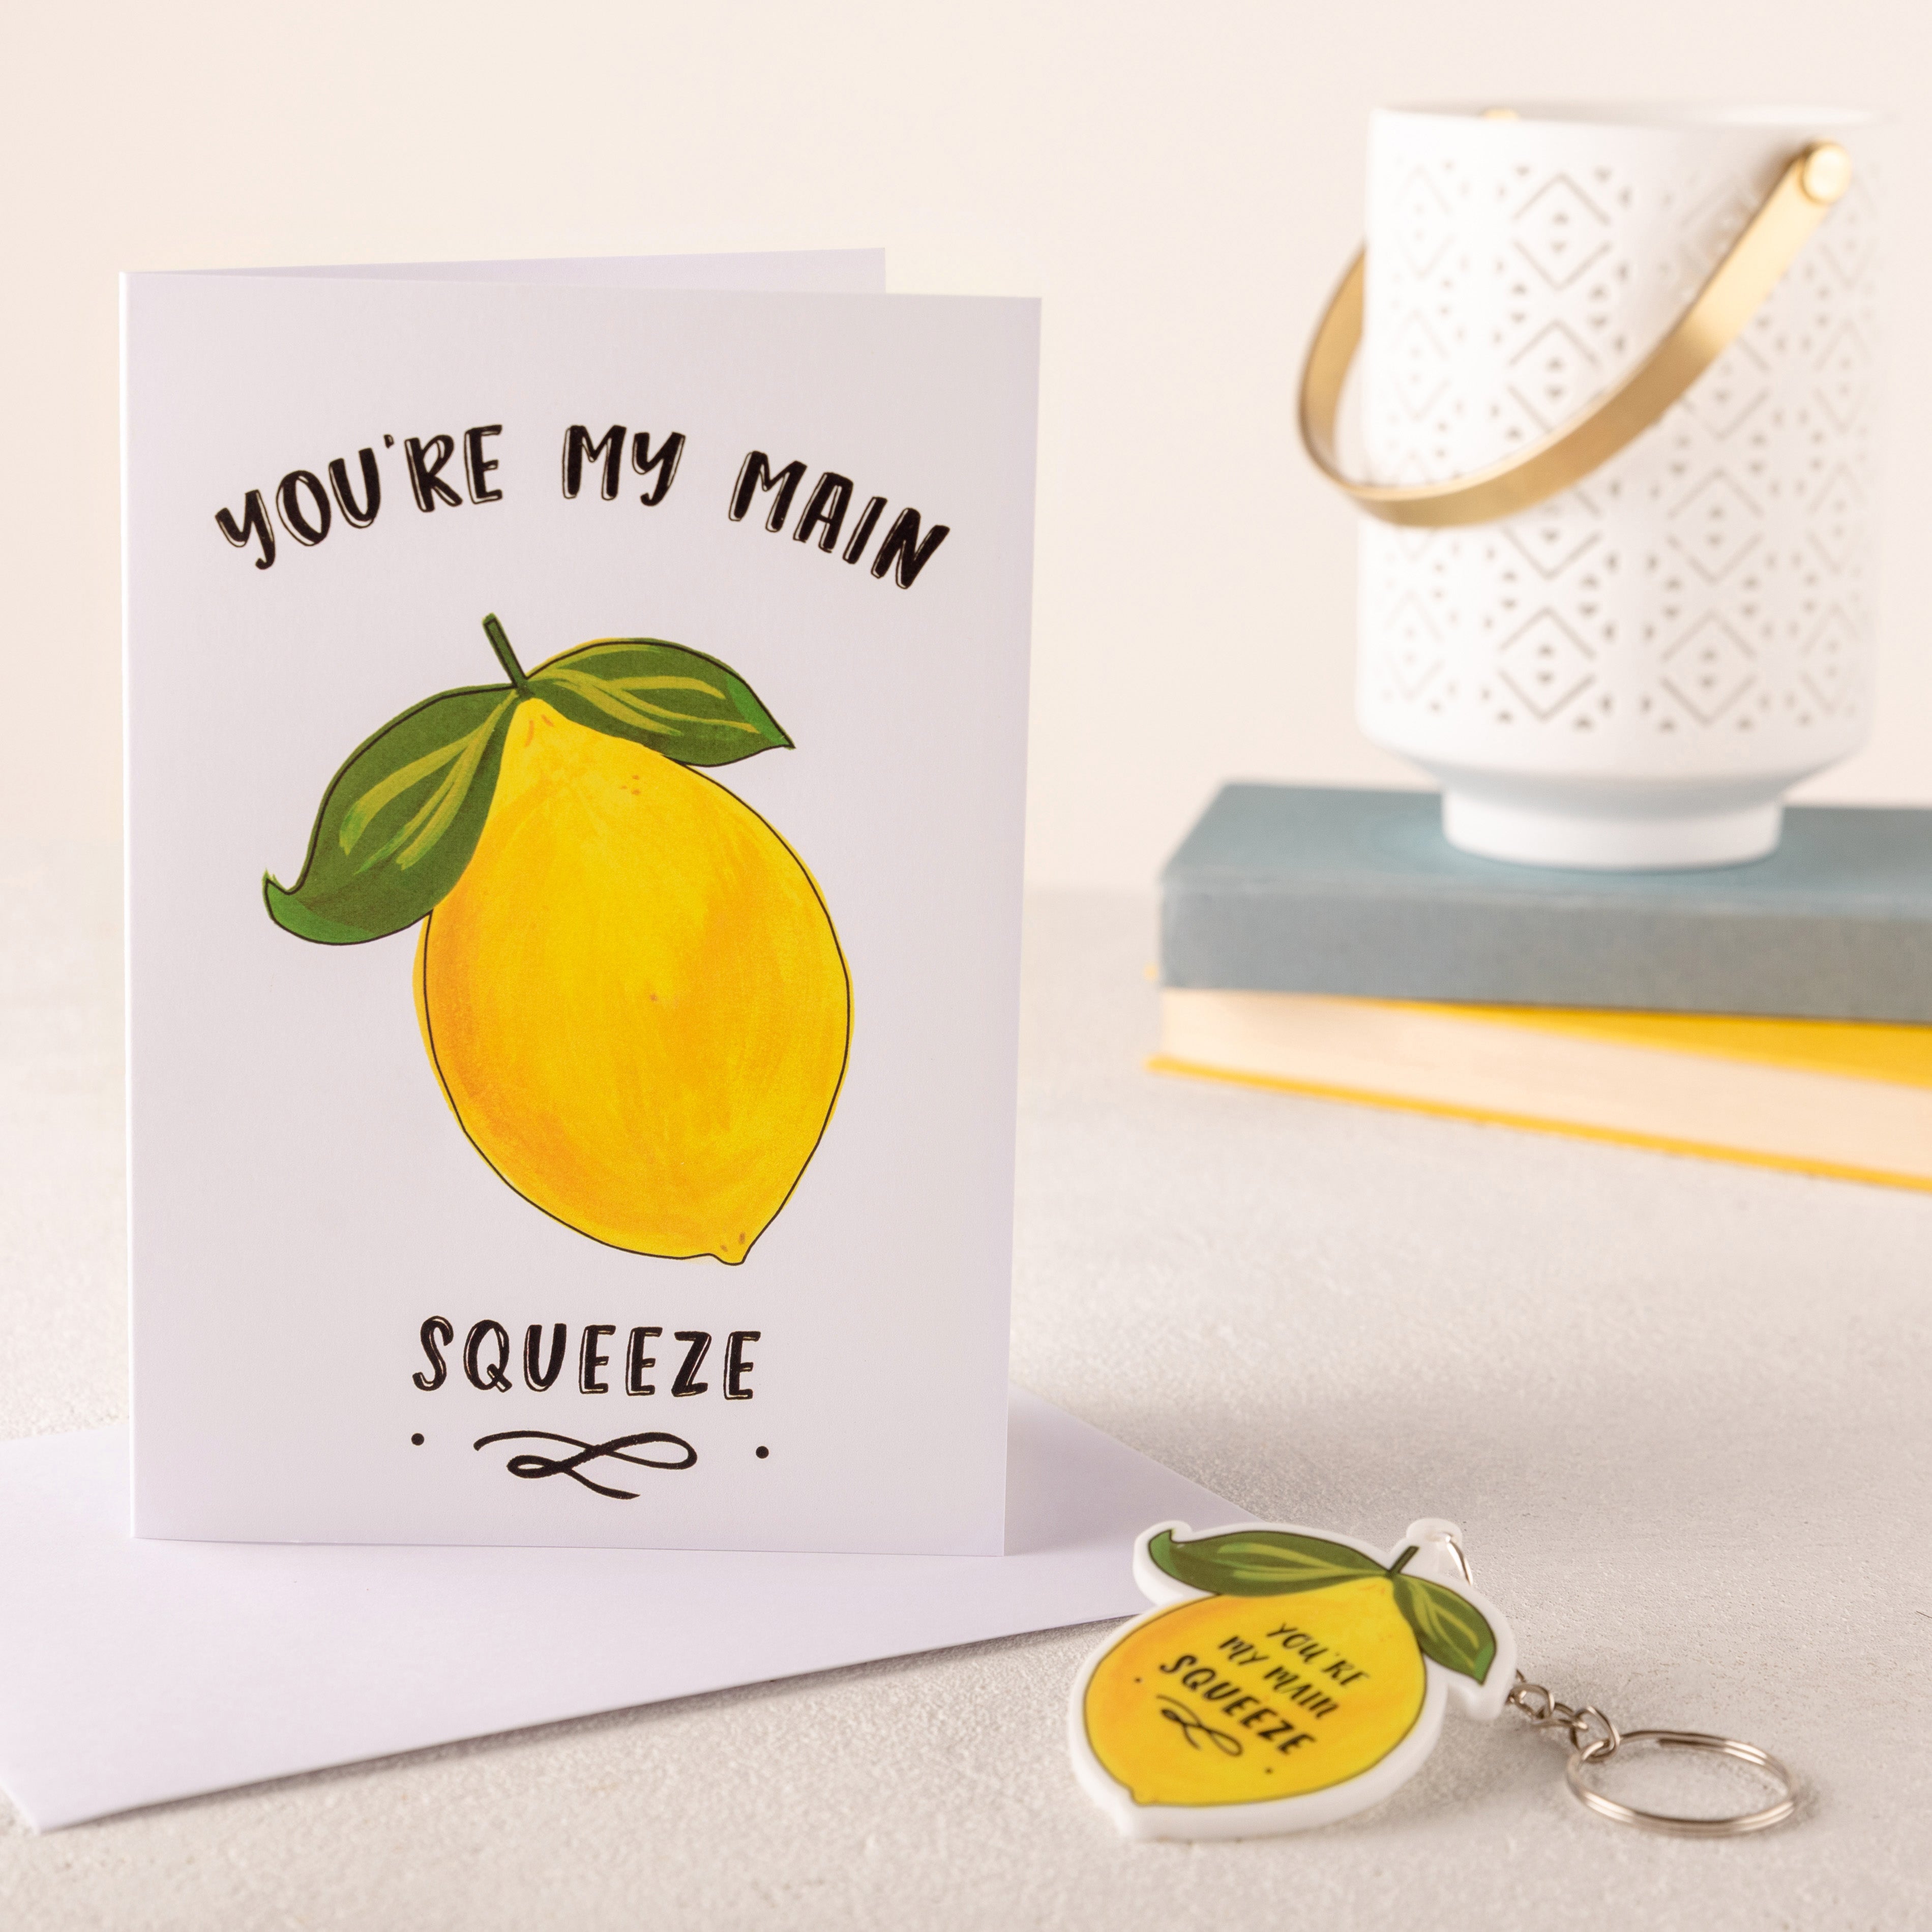 Romantic & Funny Cards